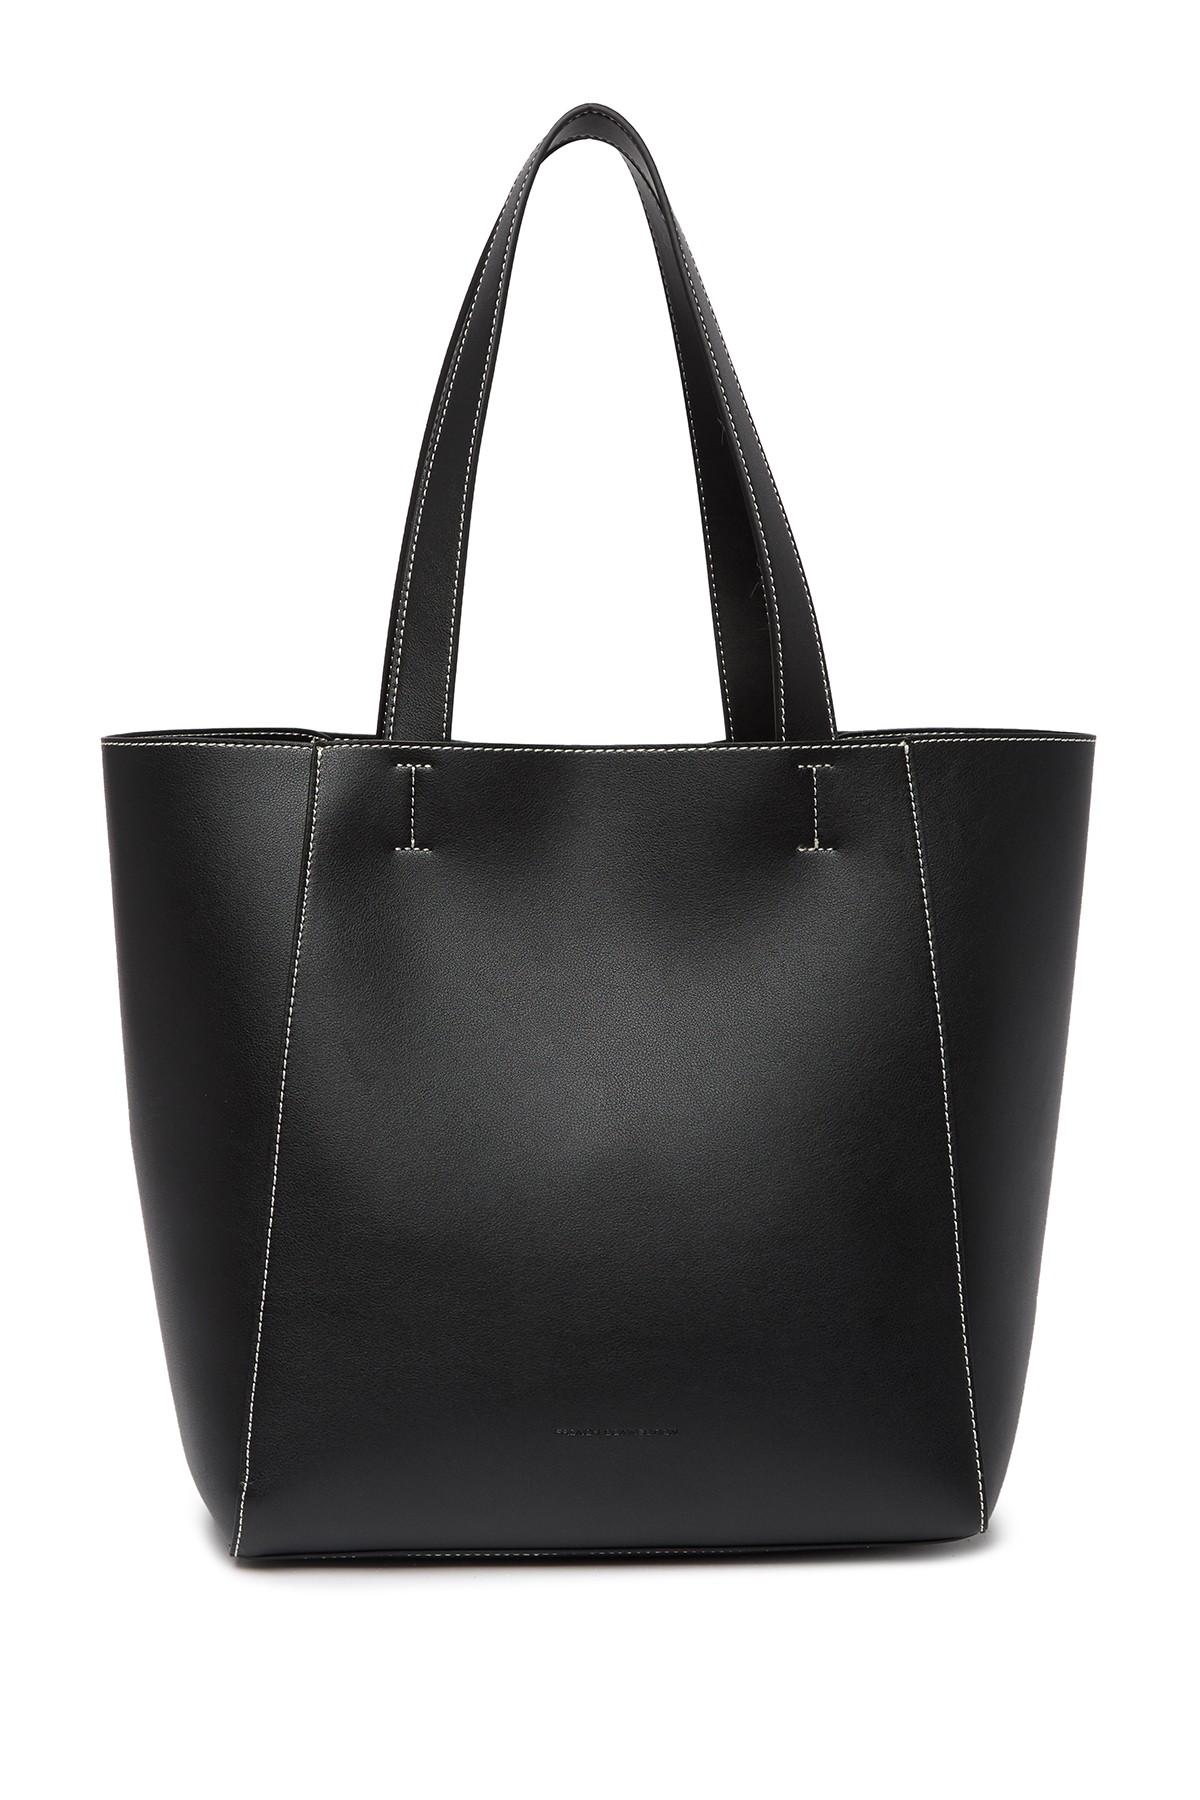 Lyst - French Connection Jacques Tote Bag in Black